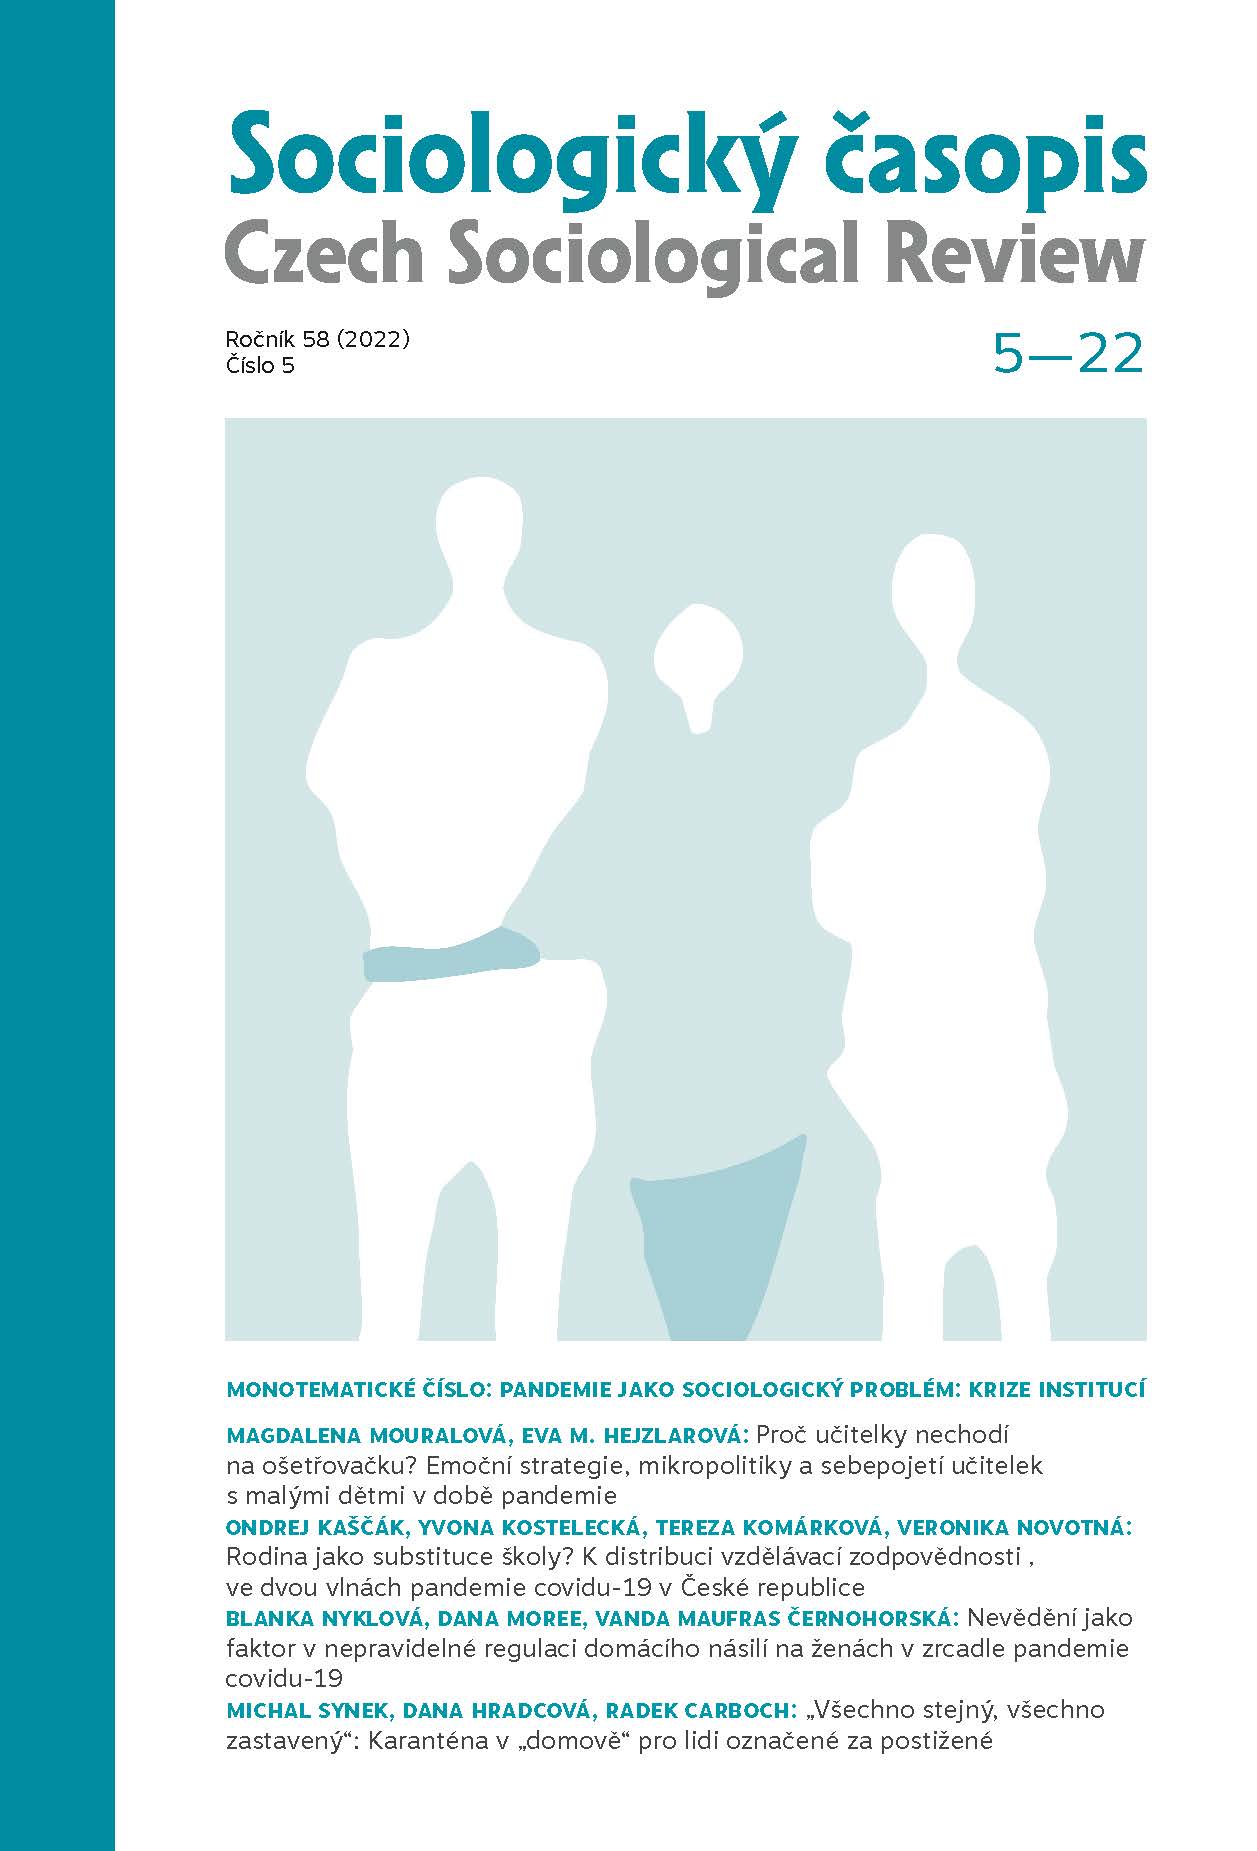 Ignorance as a Factor in the Inconsistent Regulation of Domestic Violence against Women as Mirrored in the Covid-19 Pandemic Cover Image